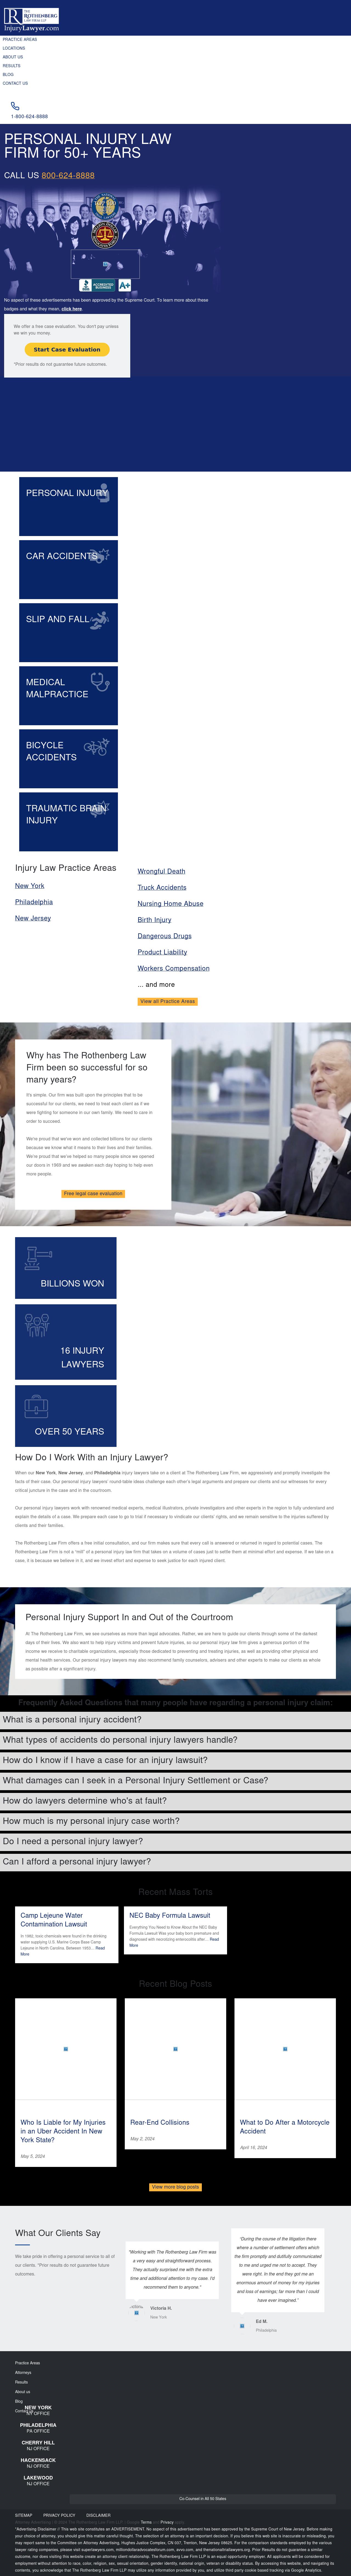 The Rothenberg Law Firm LLP - Philadelphia PA Lawyers